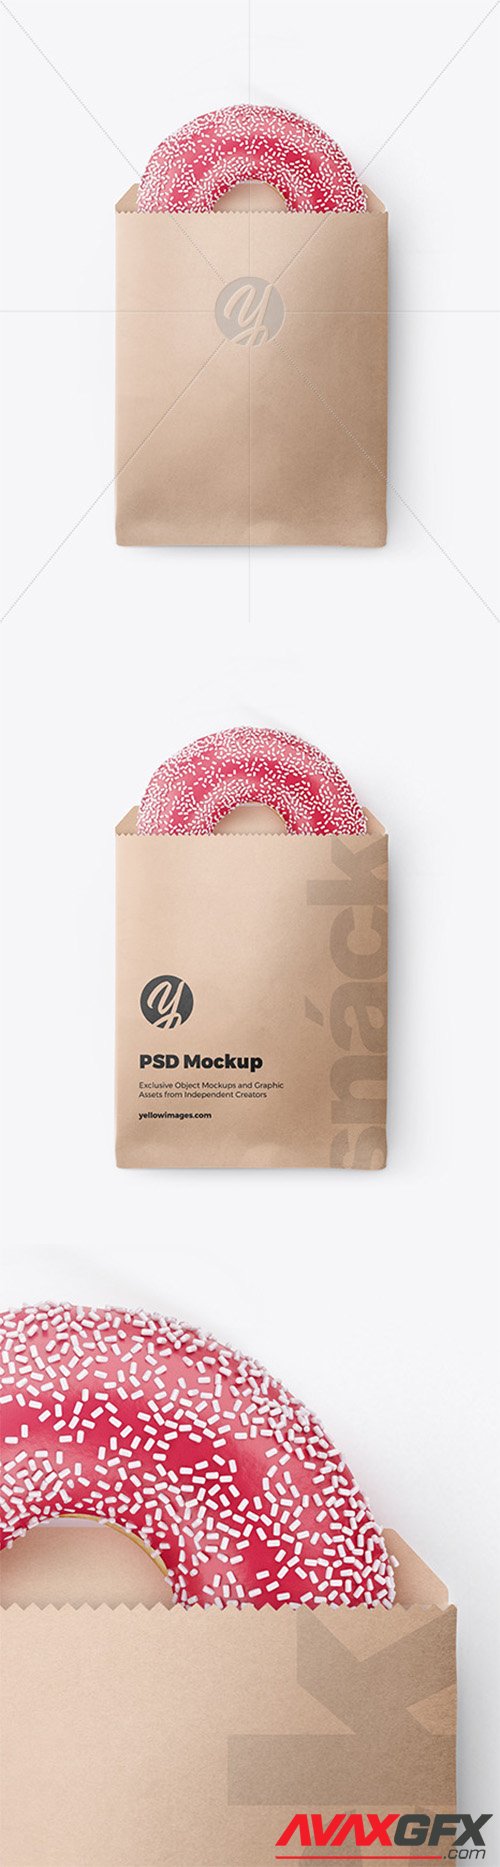 Download Psd Mockups Paper Mailing Box Potoshop Yellowimages Mockups